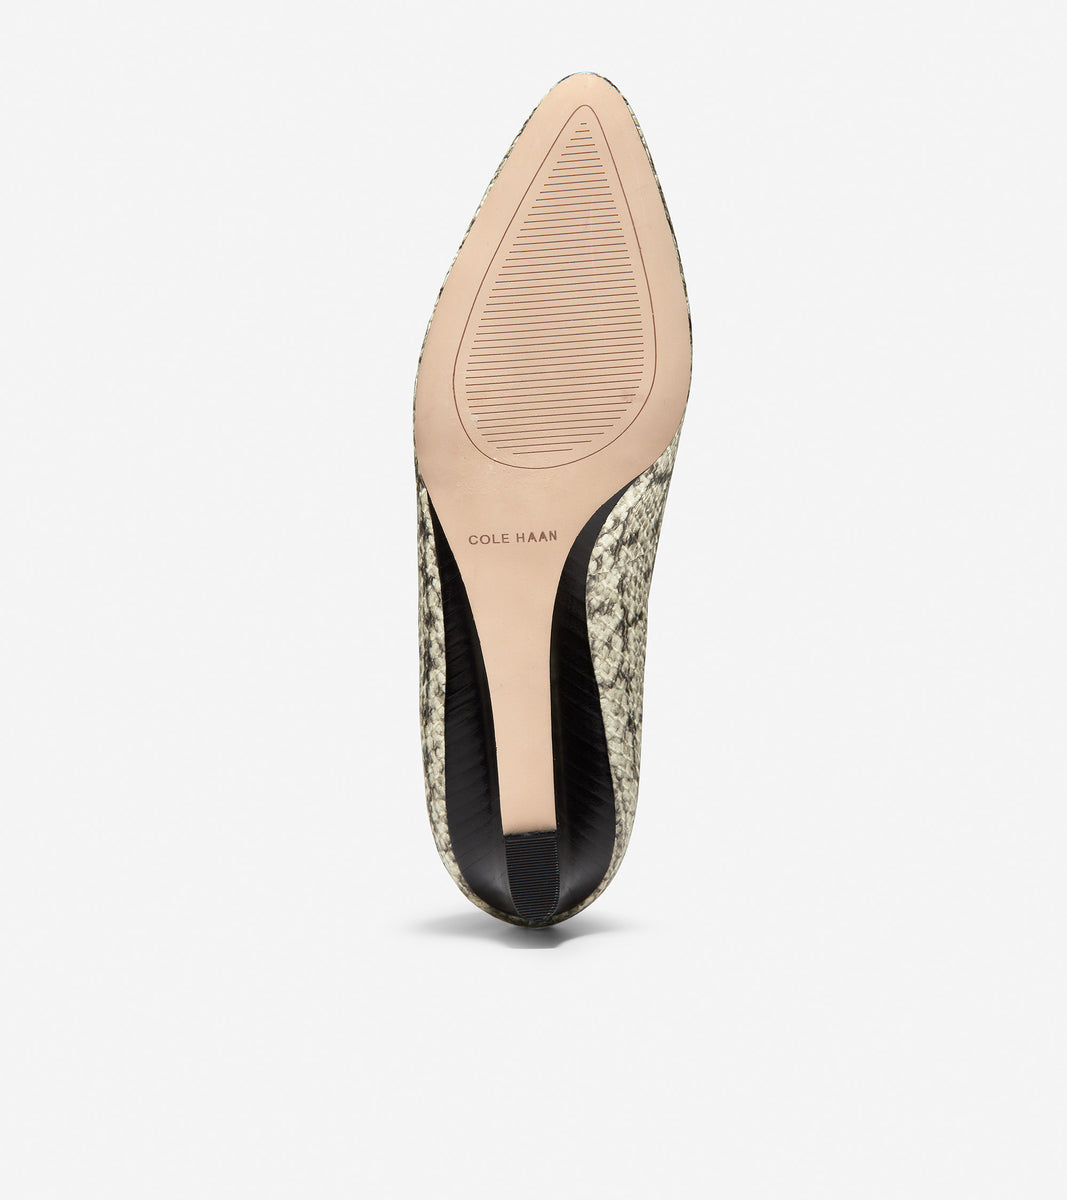 ColeHaan-Kathryn Wedge-w15839-Natural Python Print Leather